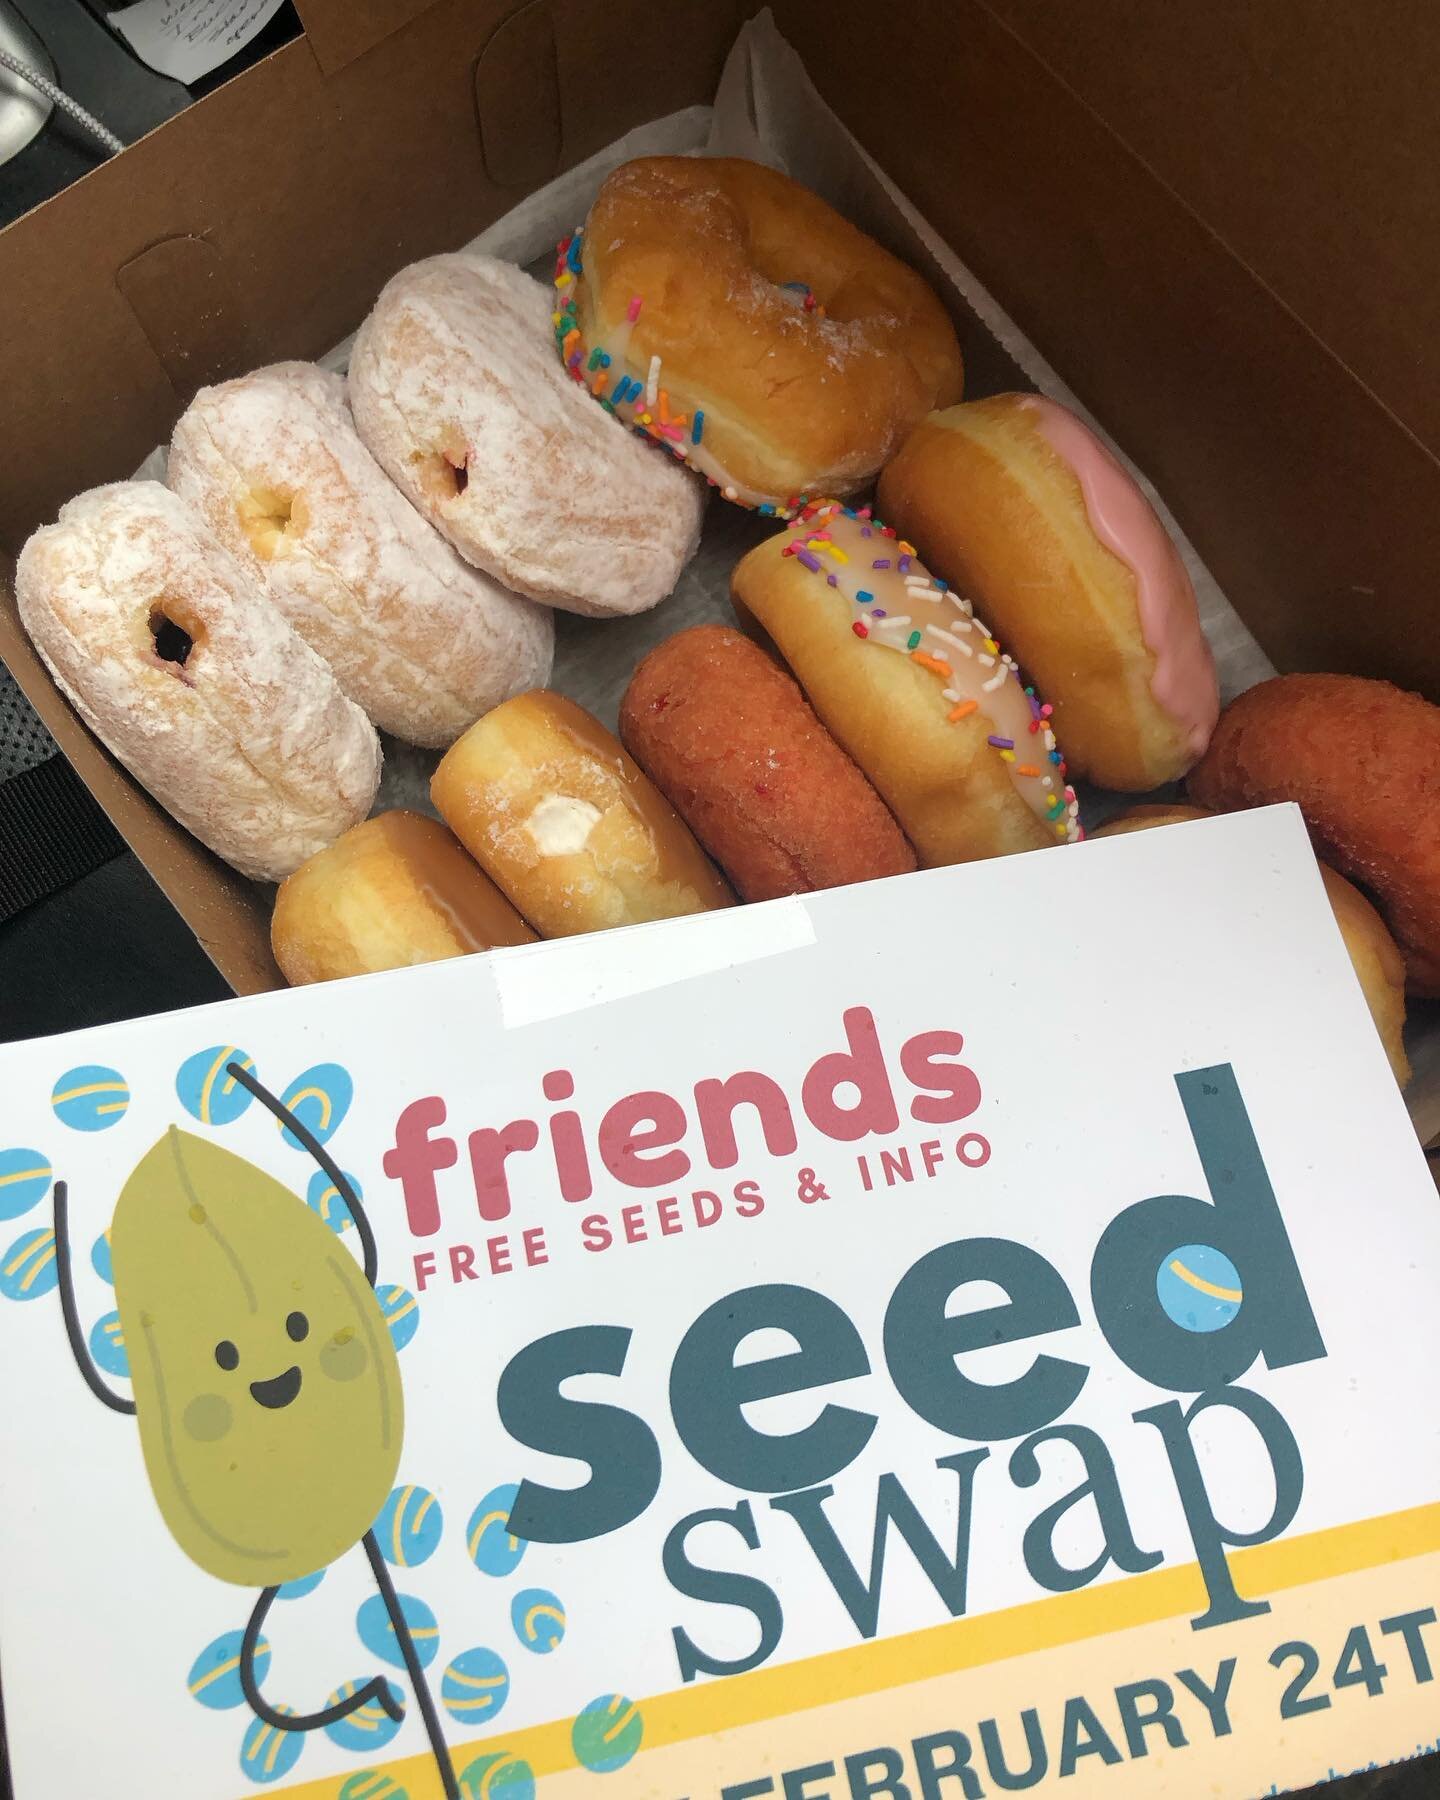 Thanks Byrd&rsquo;s House of Donuts hosting the seed swap today. Best donuts in town supports local home gardeners too #growyourfood